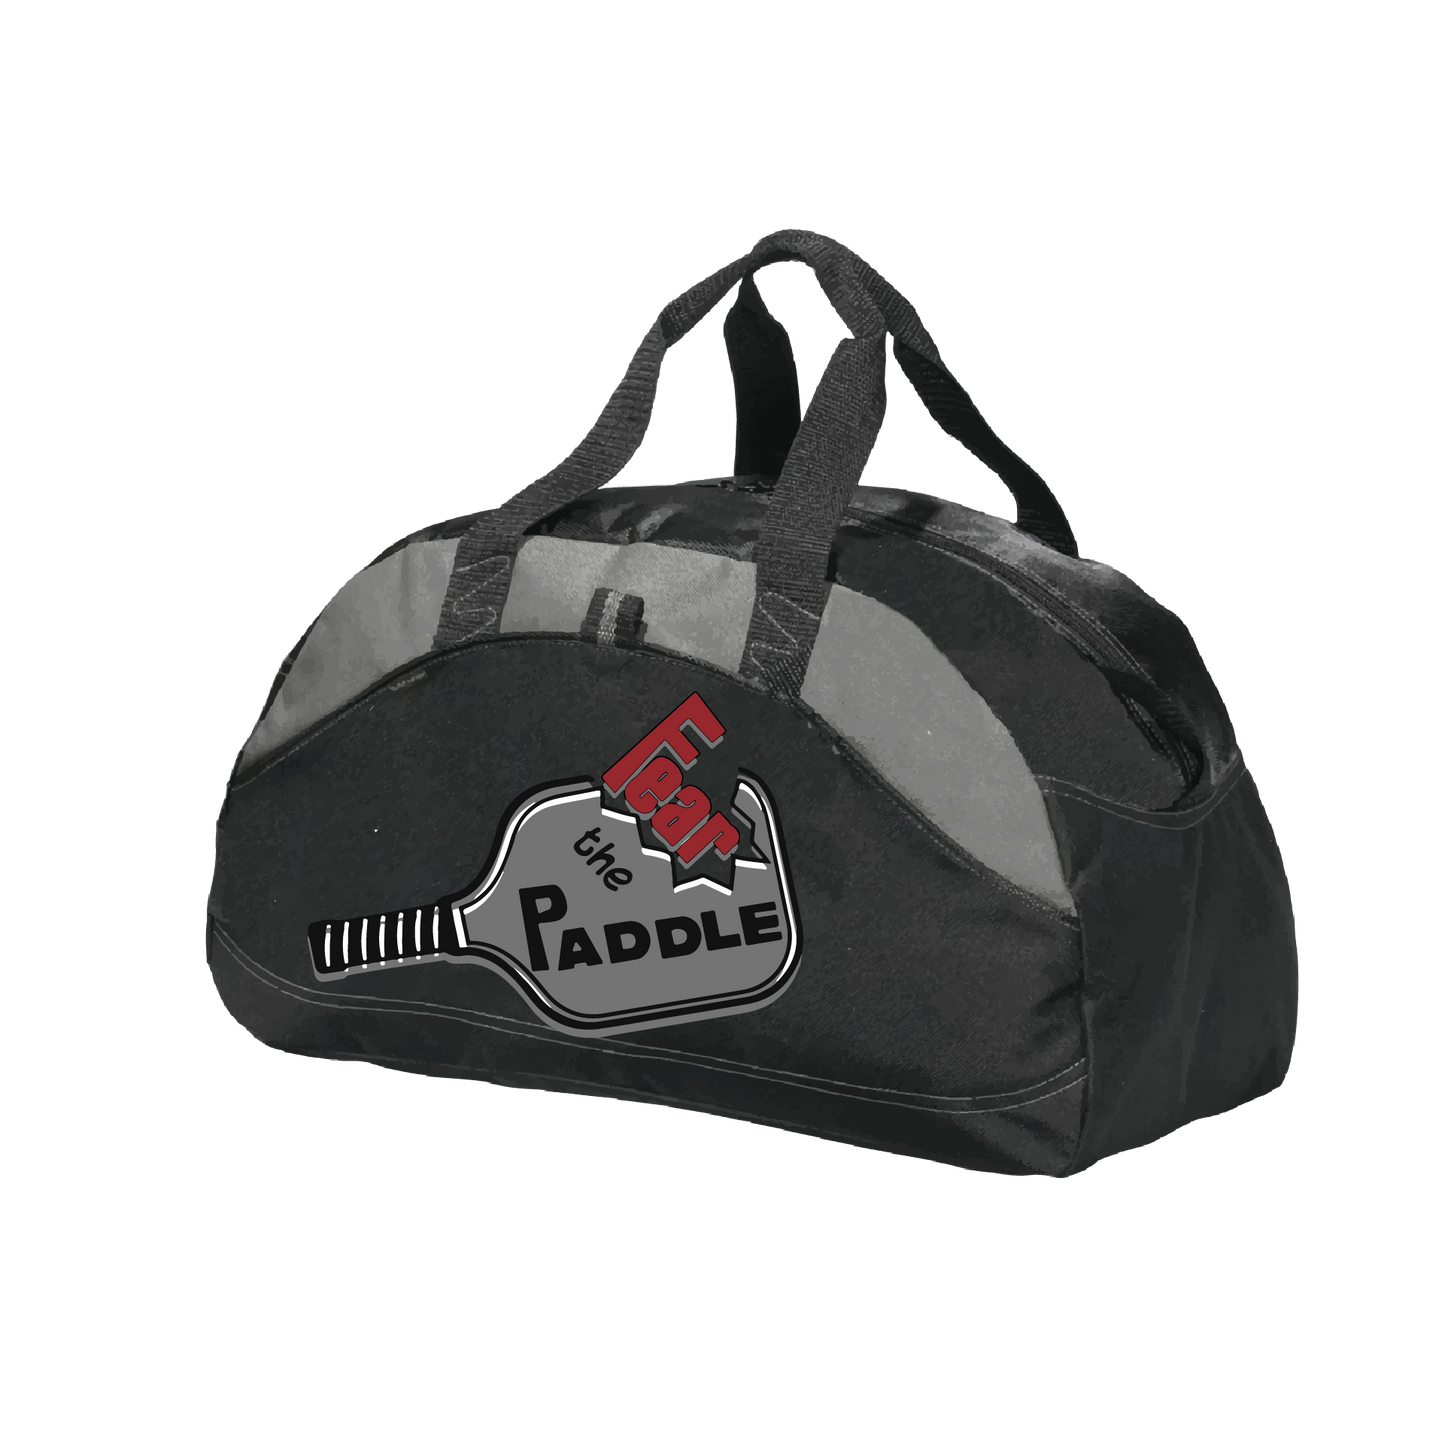 Pickleball Design: Fear the Paddle  Carry your gear in comfort and style. This fun pickleball duffel bag is the perfect accessory for all pickleball players needing to keep their gear in one place. This medium sized duffel tote is ideal for all your pickleball activities. The large center compartment allows for plenty of space and the mesh end pocket is perfect for holding a water bottle. Duffel bag comes with an adjustable shoulder strap and the polyester material is durable and easily cleaned.